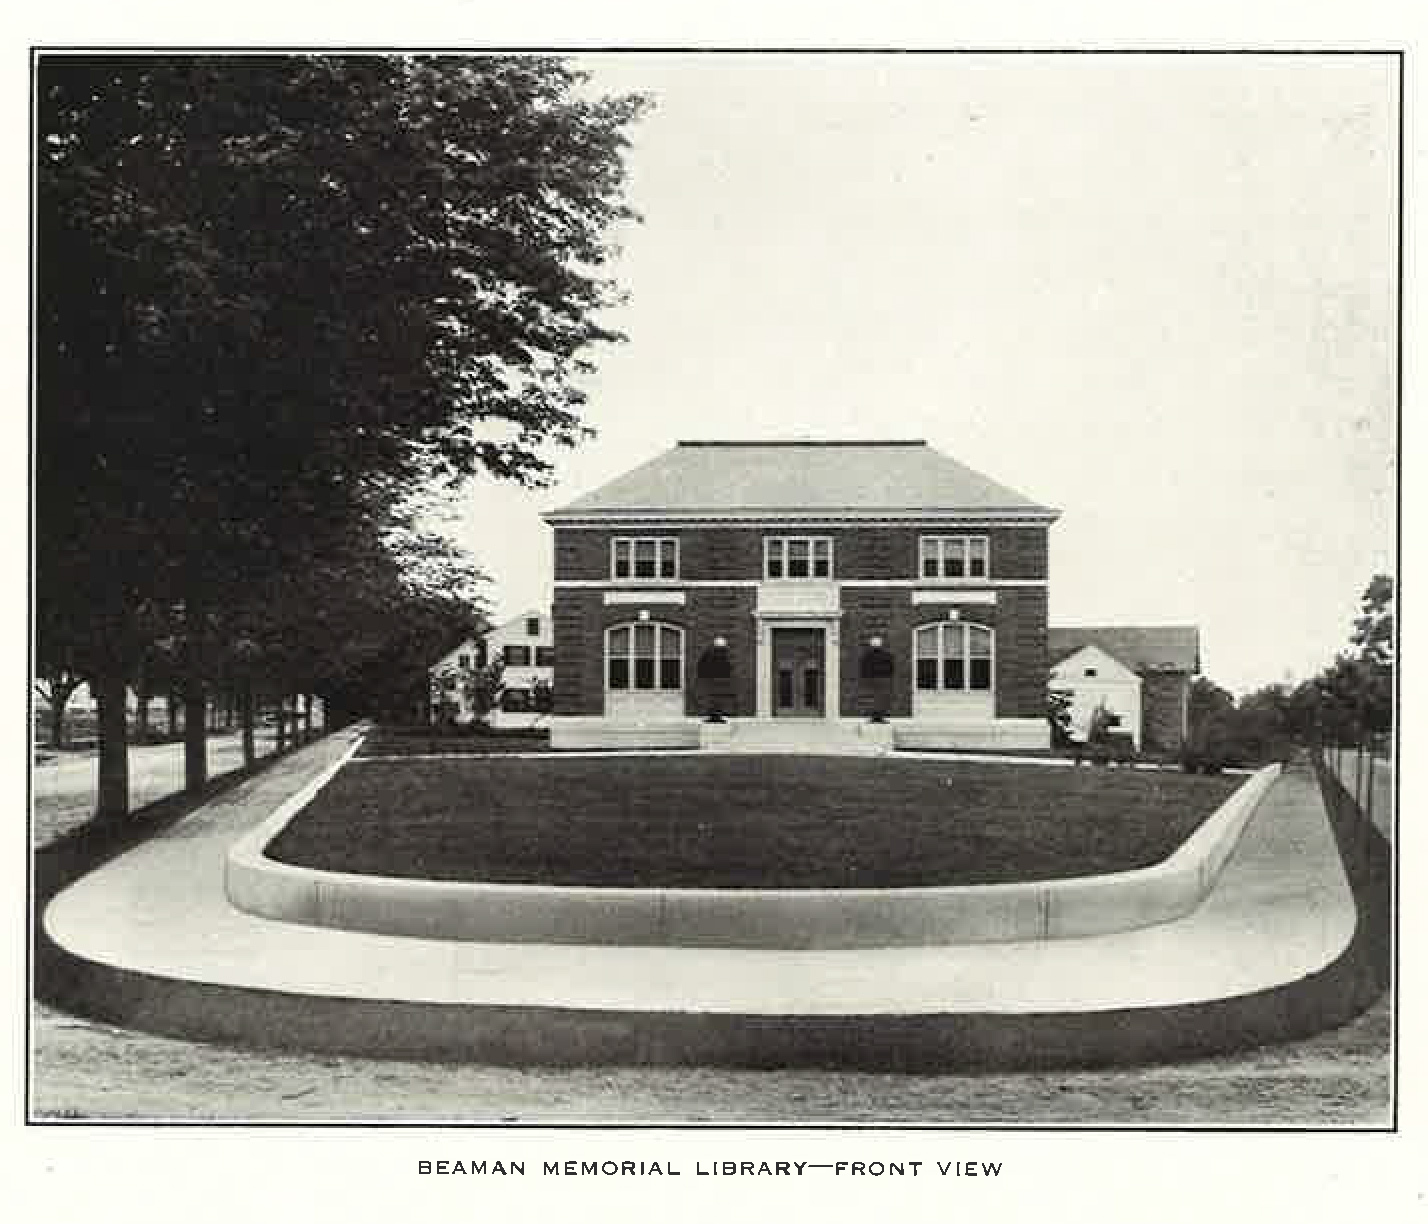 Larger image of the Library in 1912